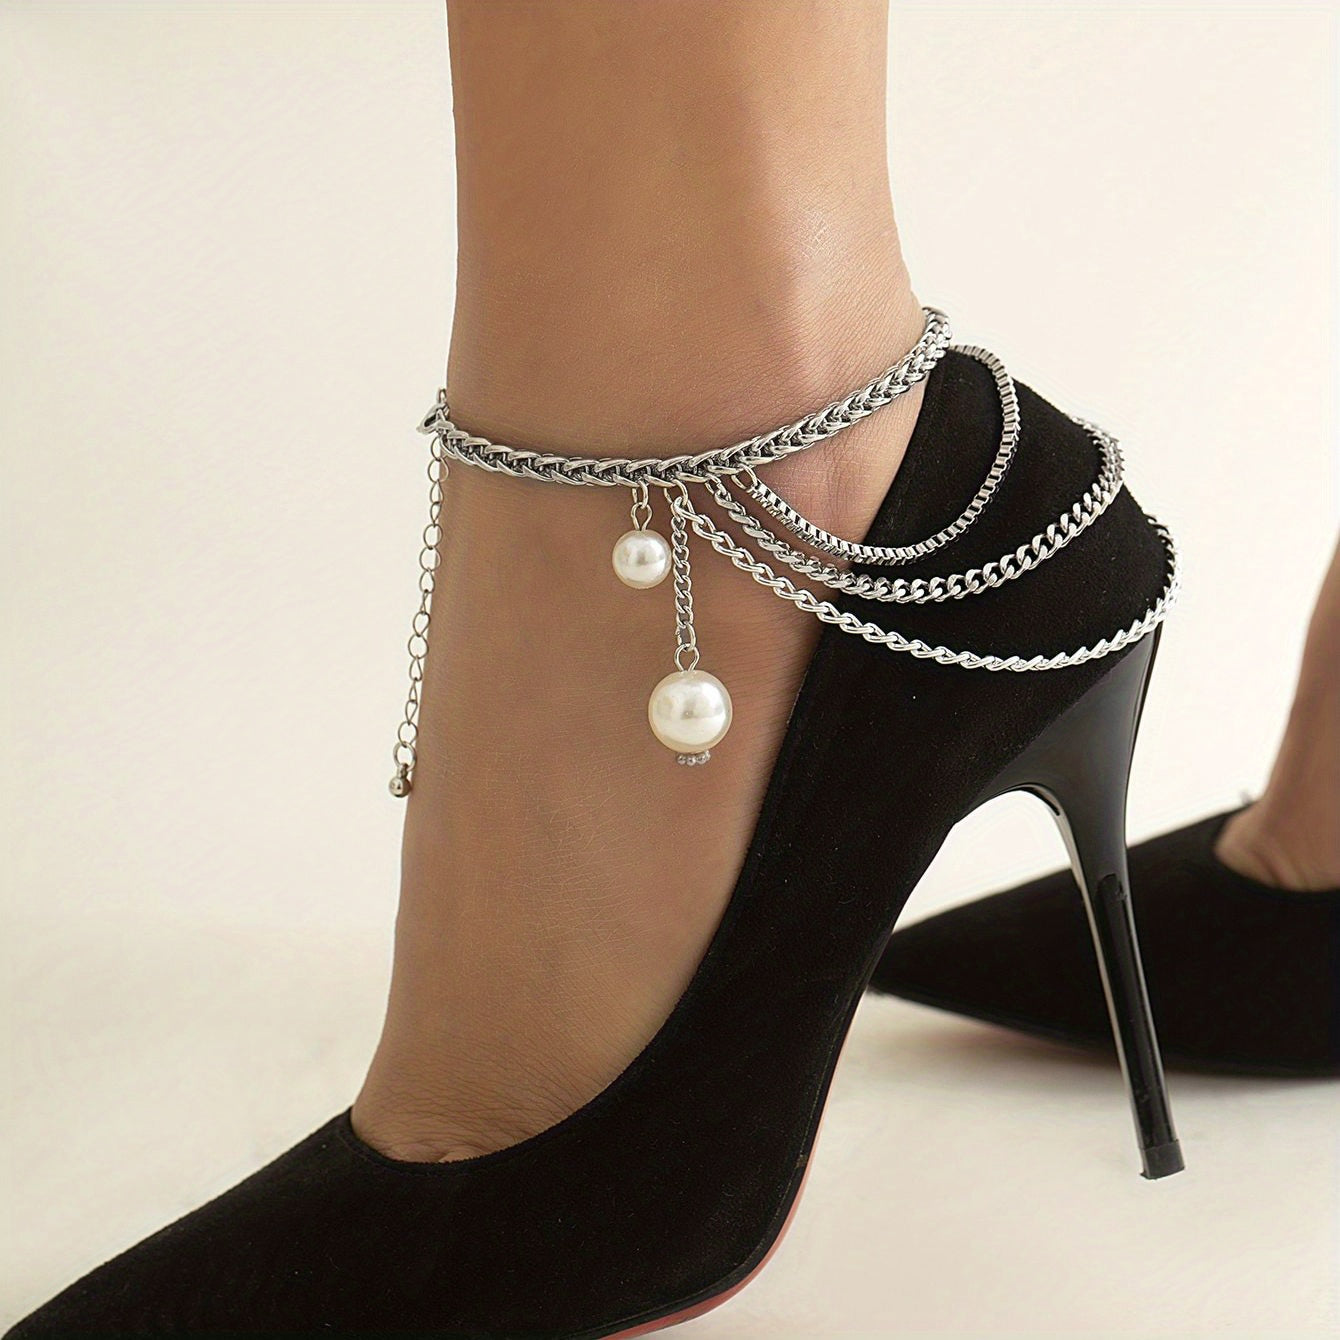 Gorgeous Faux Pearl Layered Anklet - Perfect for Any Occasion!